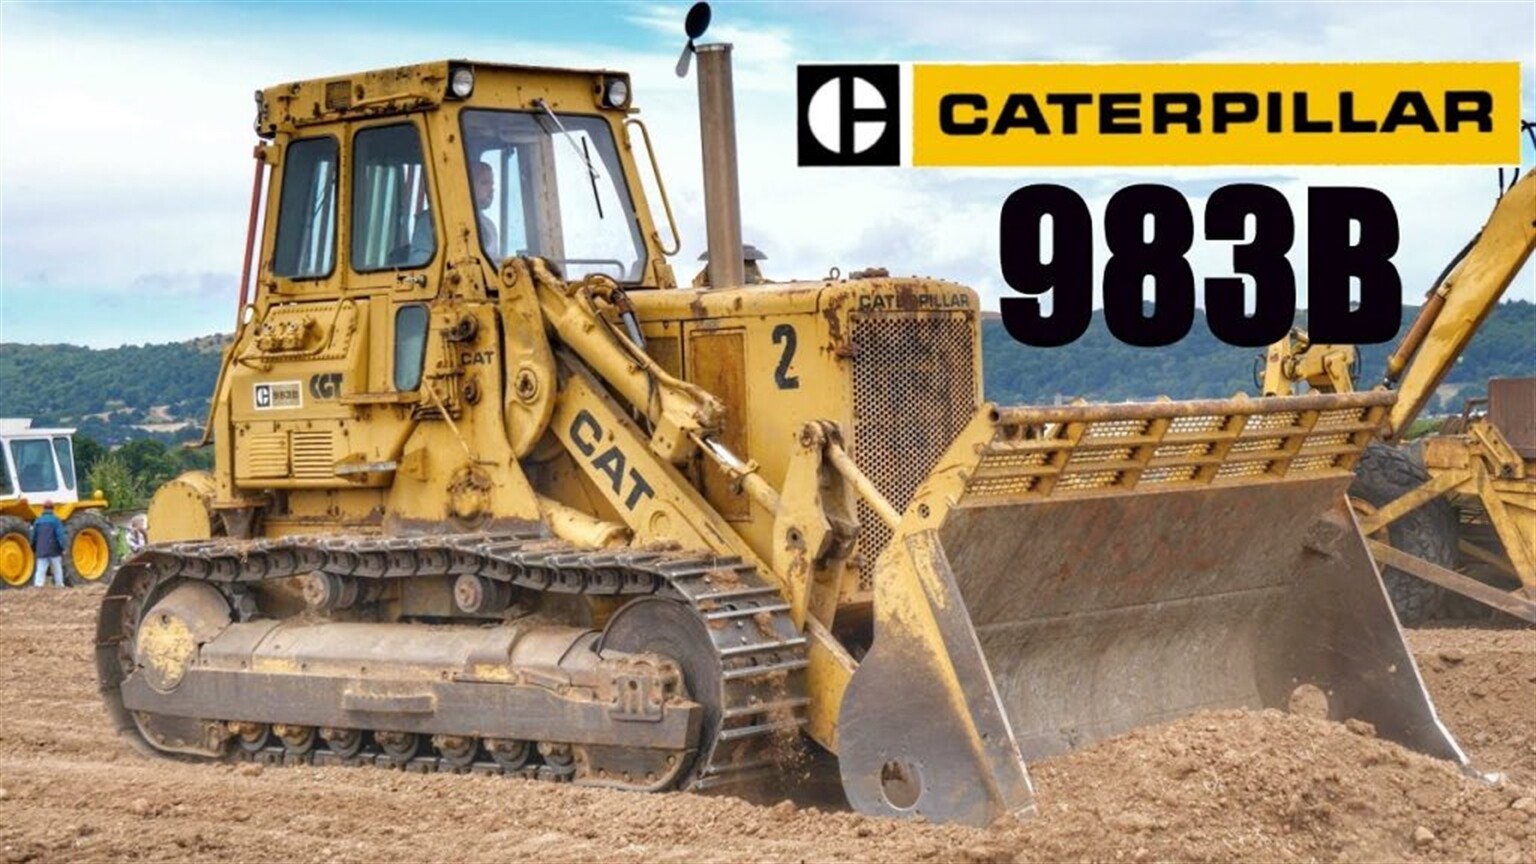 Awesome footage of an Awesome Earthmover